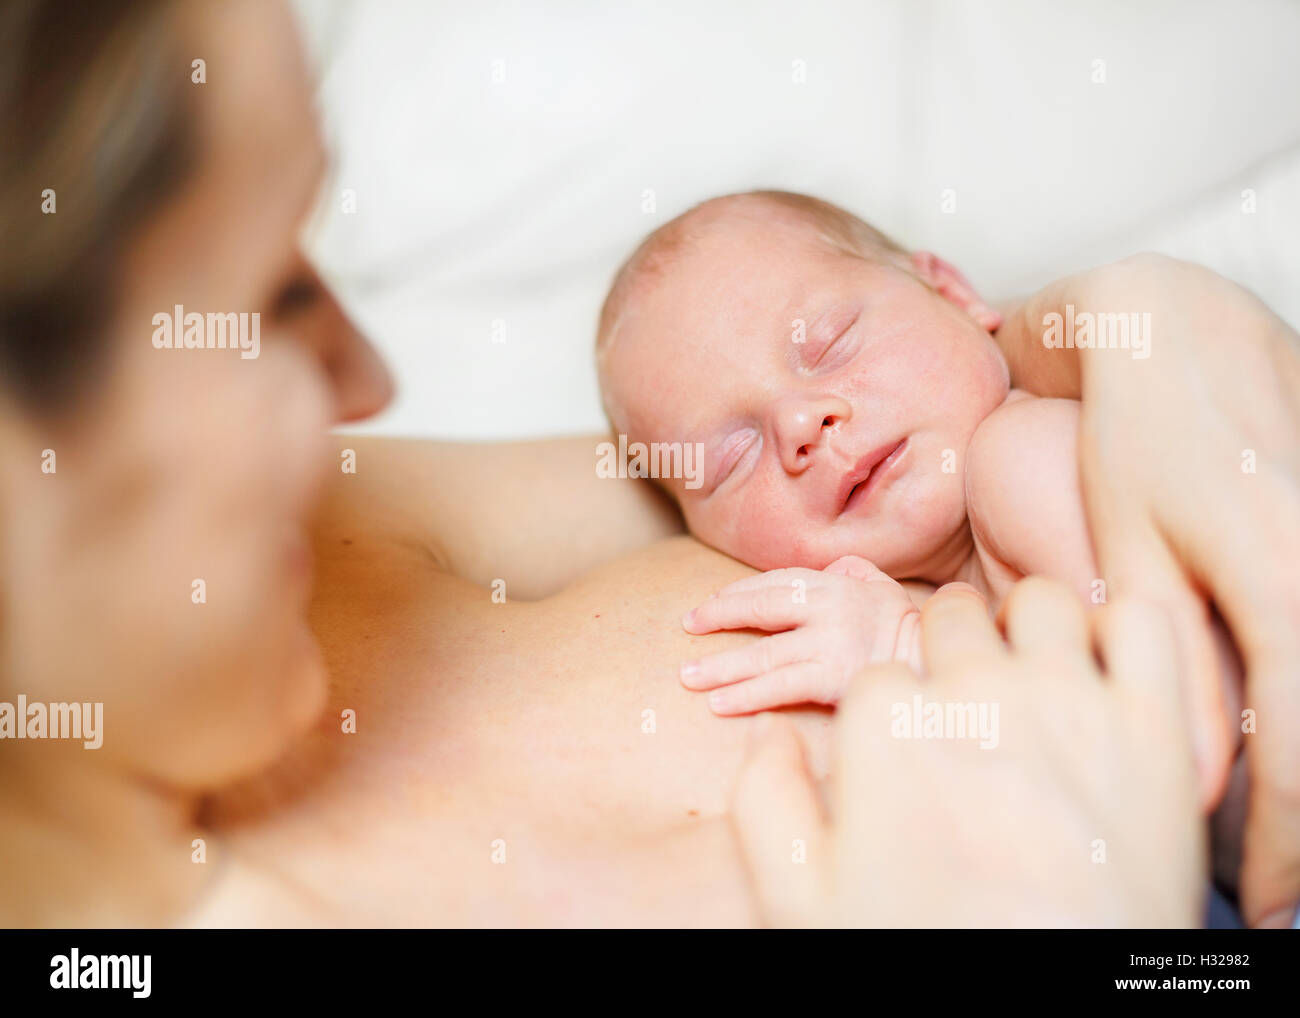 Newborn baby Aged 11 Days and mother Stock Photo